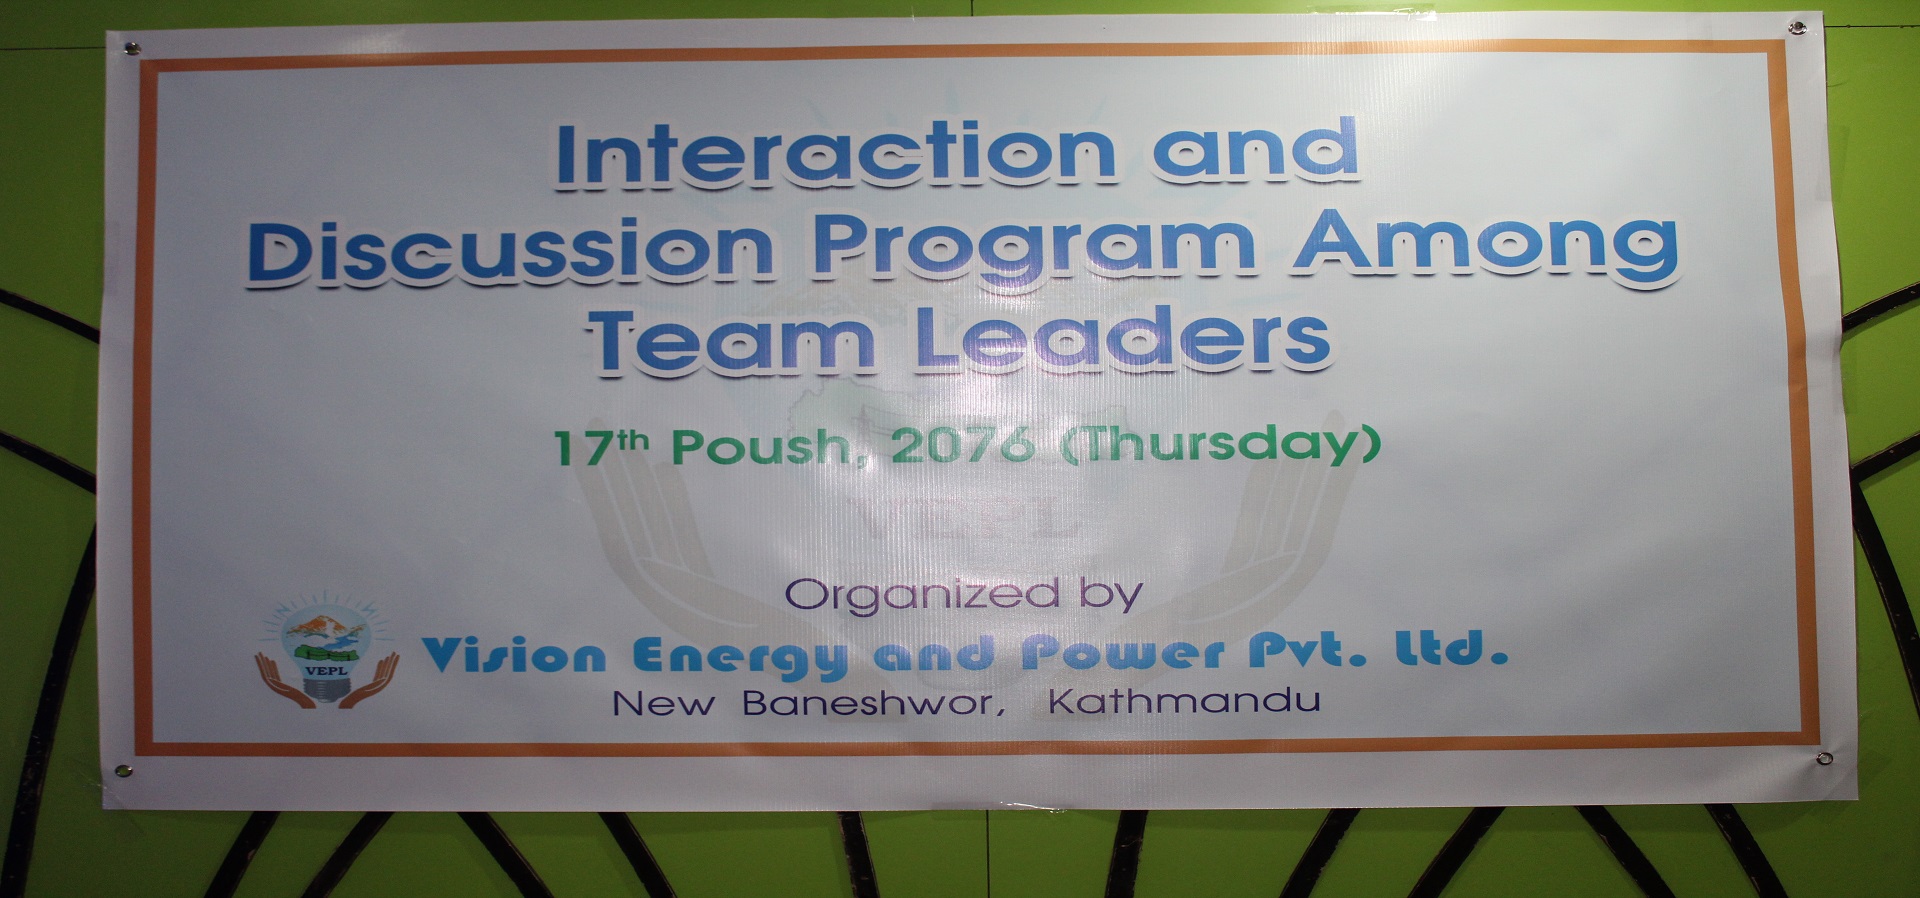 Interaction and discussion program among team leaders